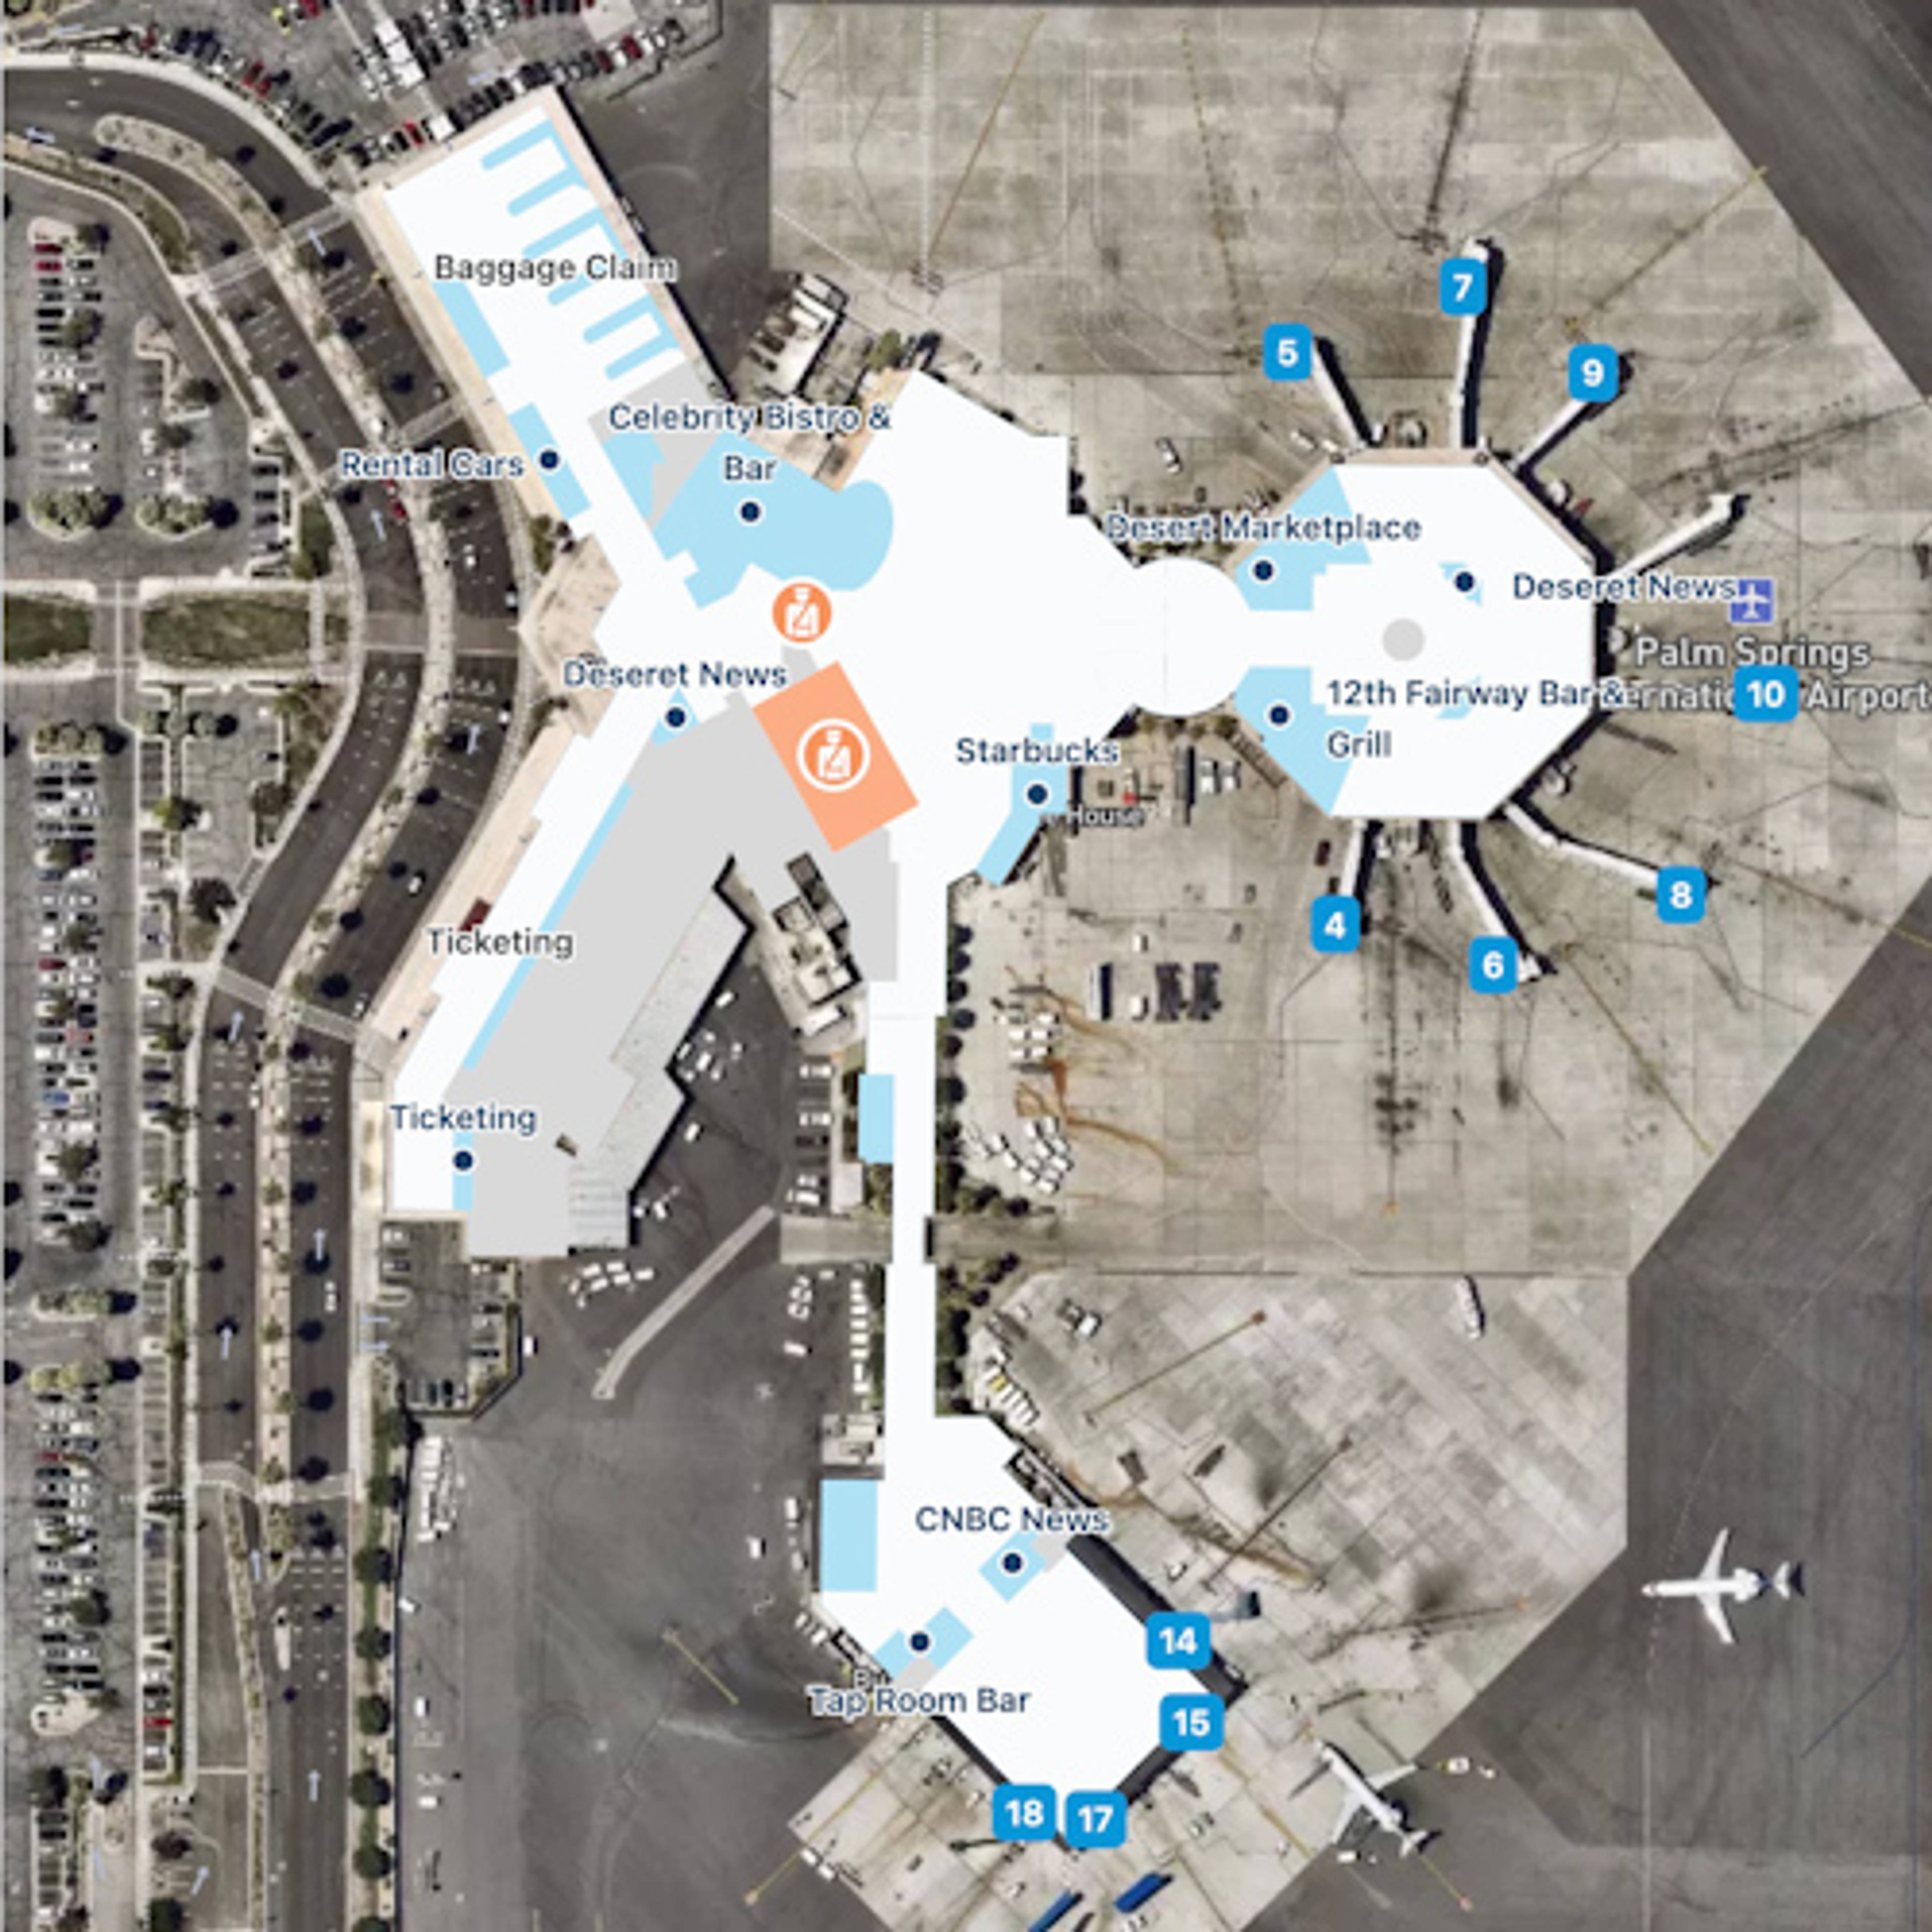 Palm Springs Airport Overview Map